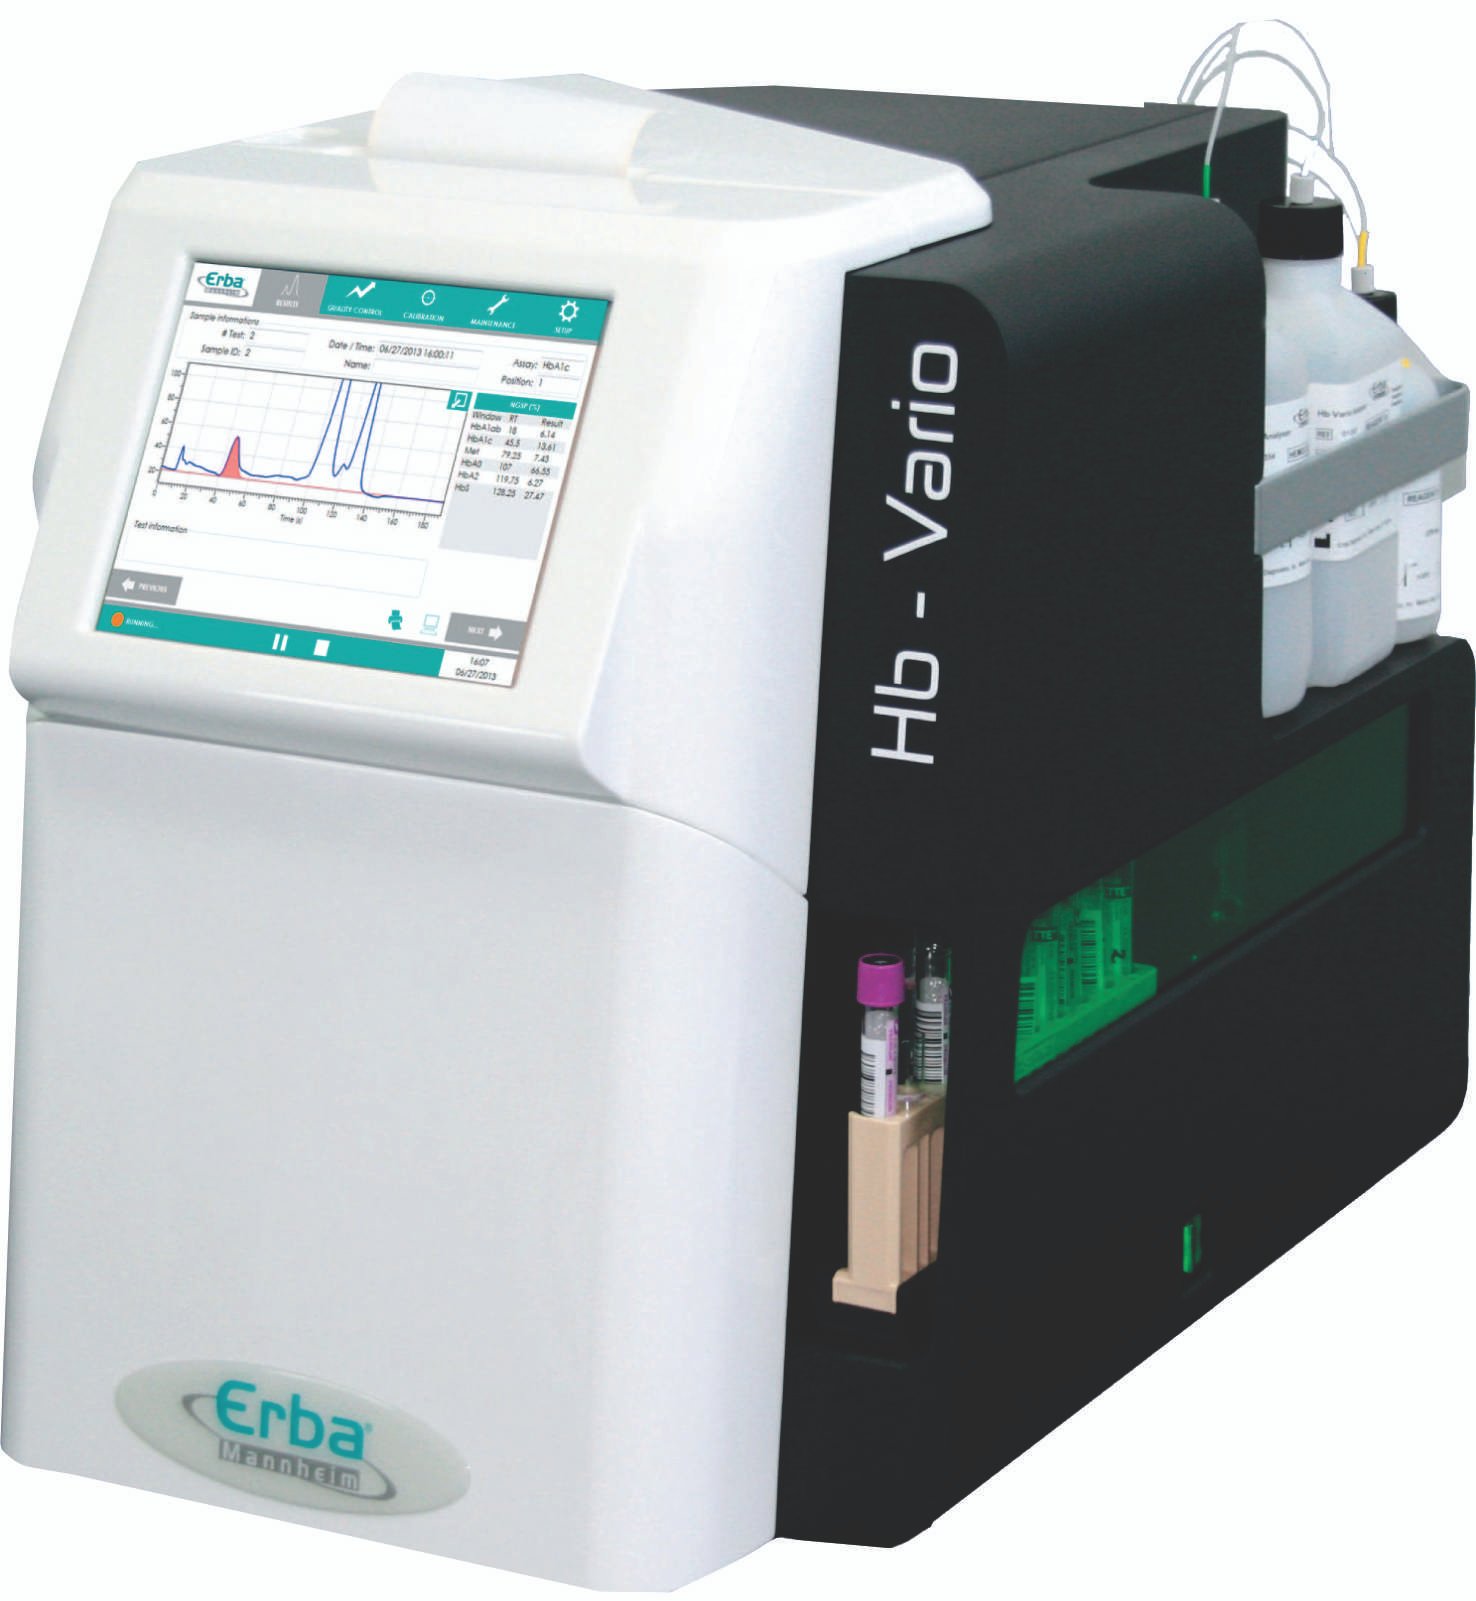 The new Analyzer comprises of a HPLC with unique CLE technology